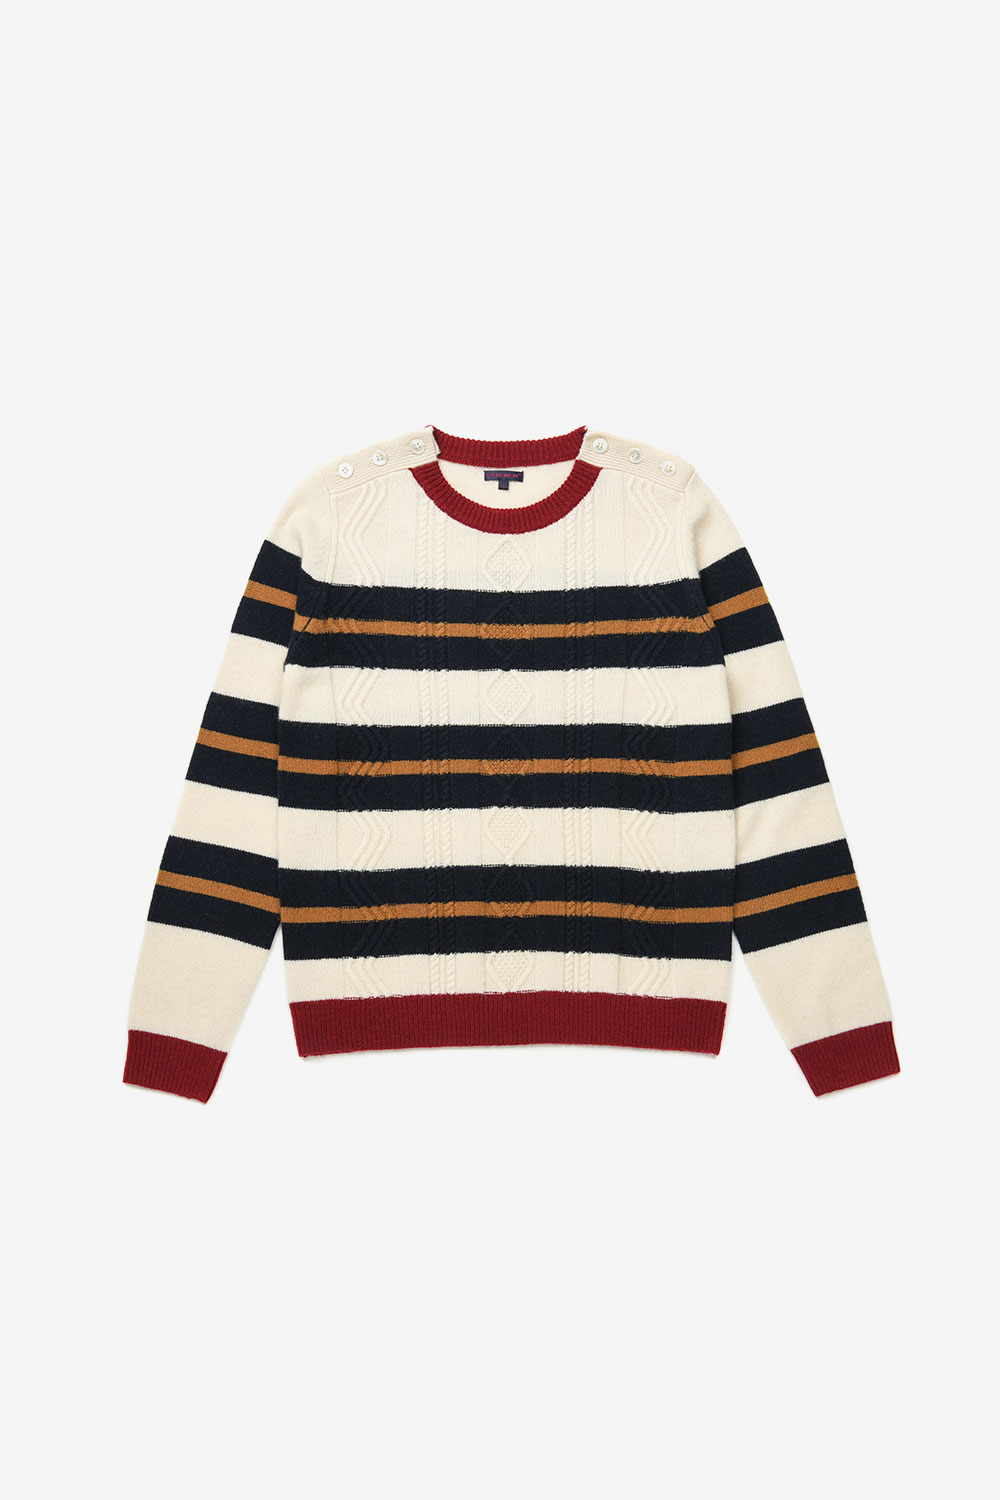 [PARIS COLLECTION] Pull Clelia Sweater